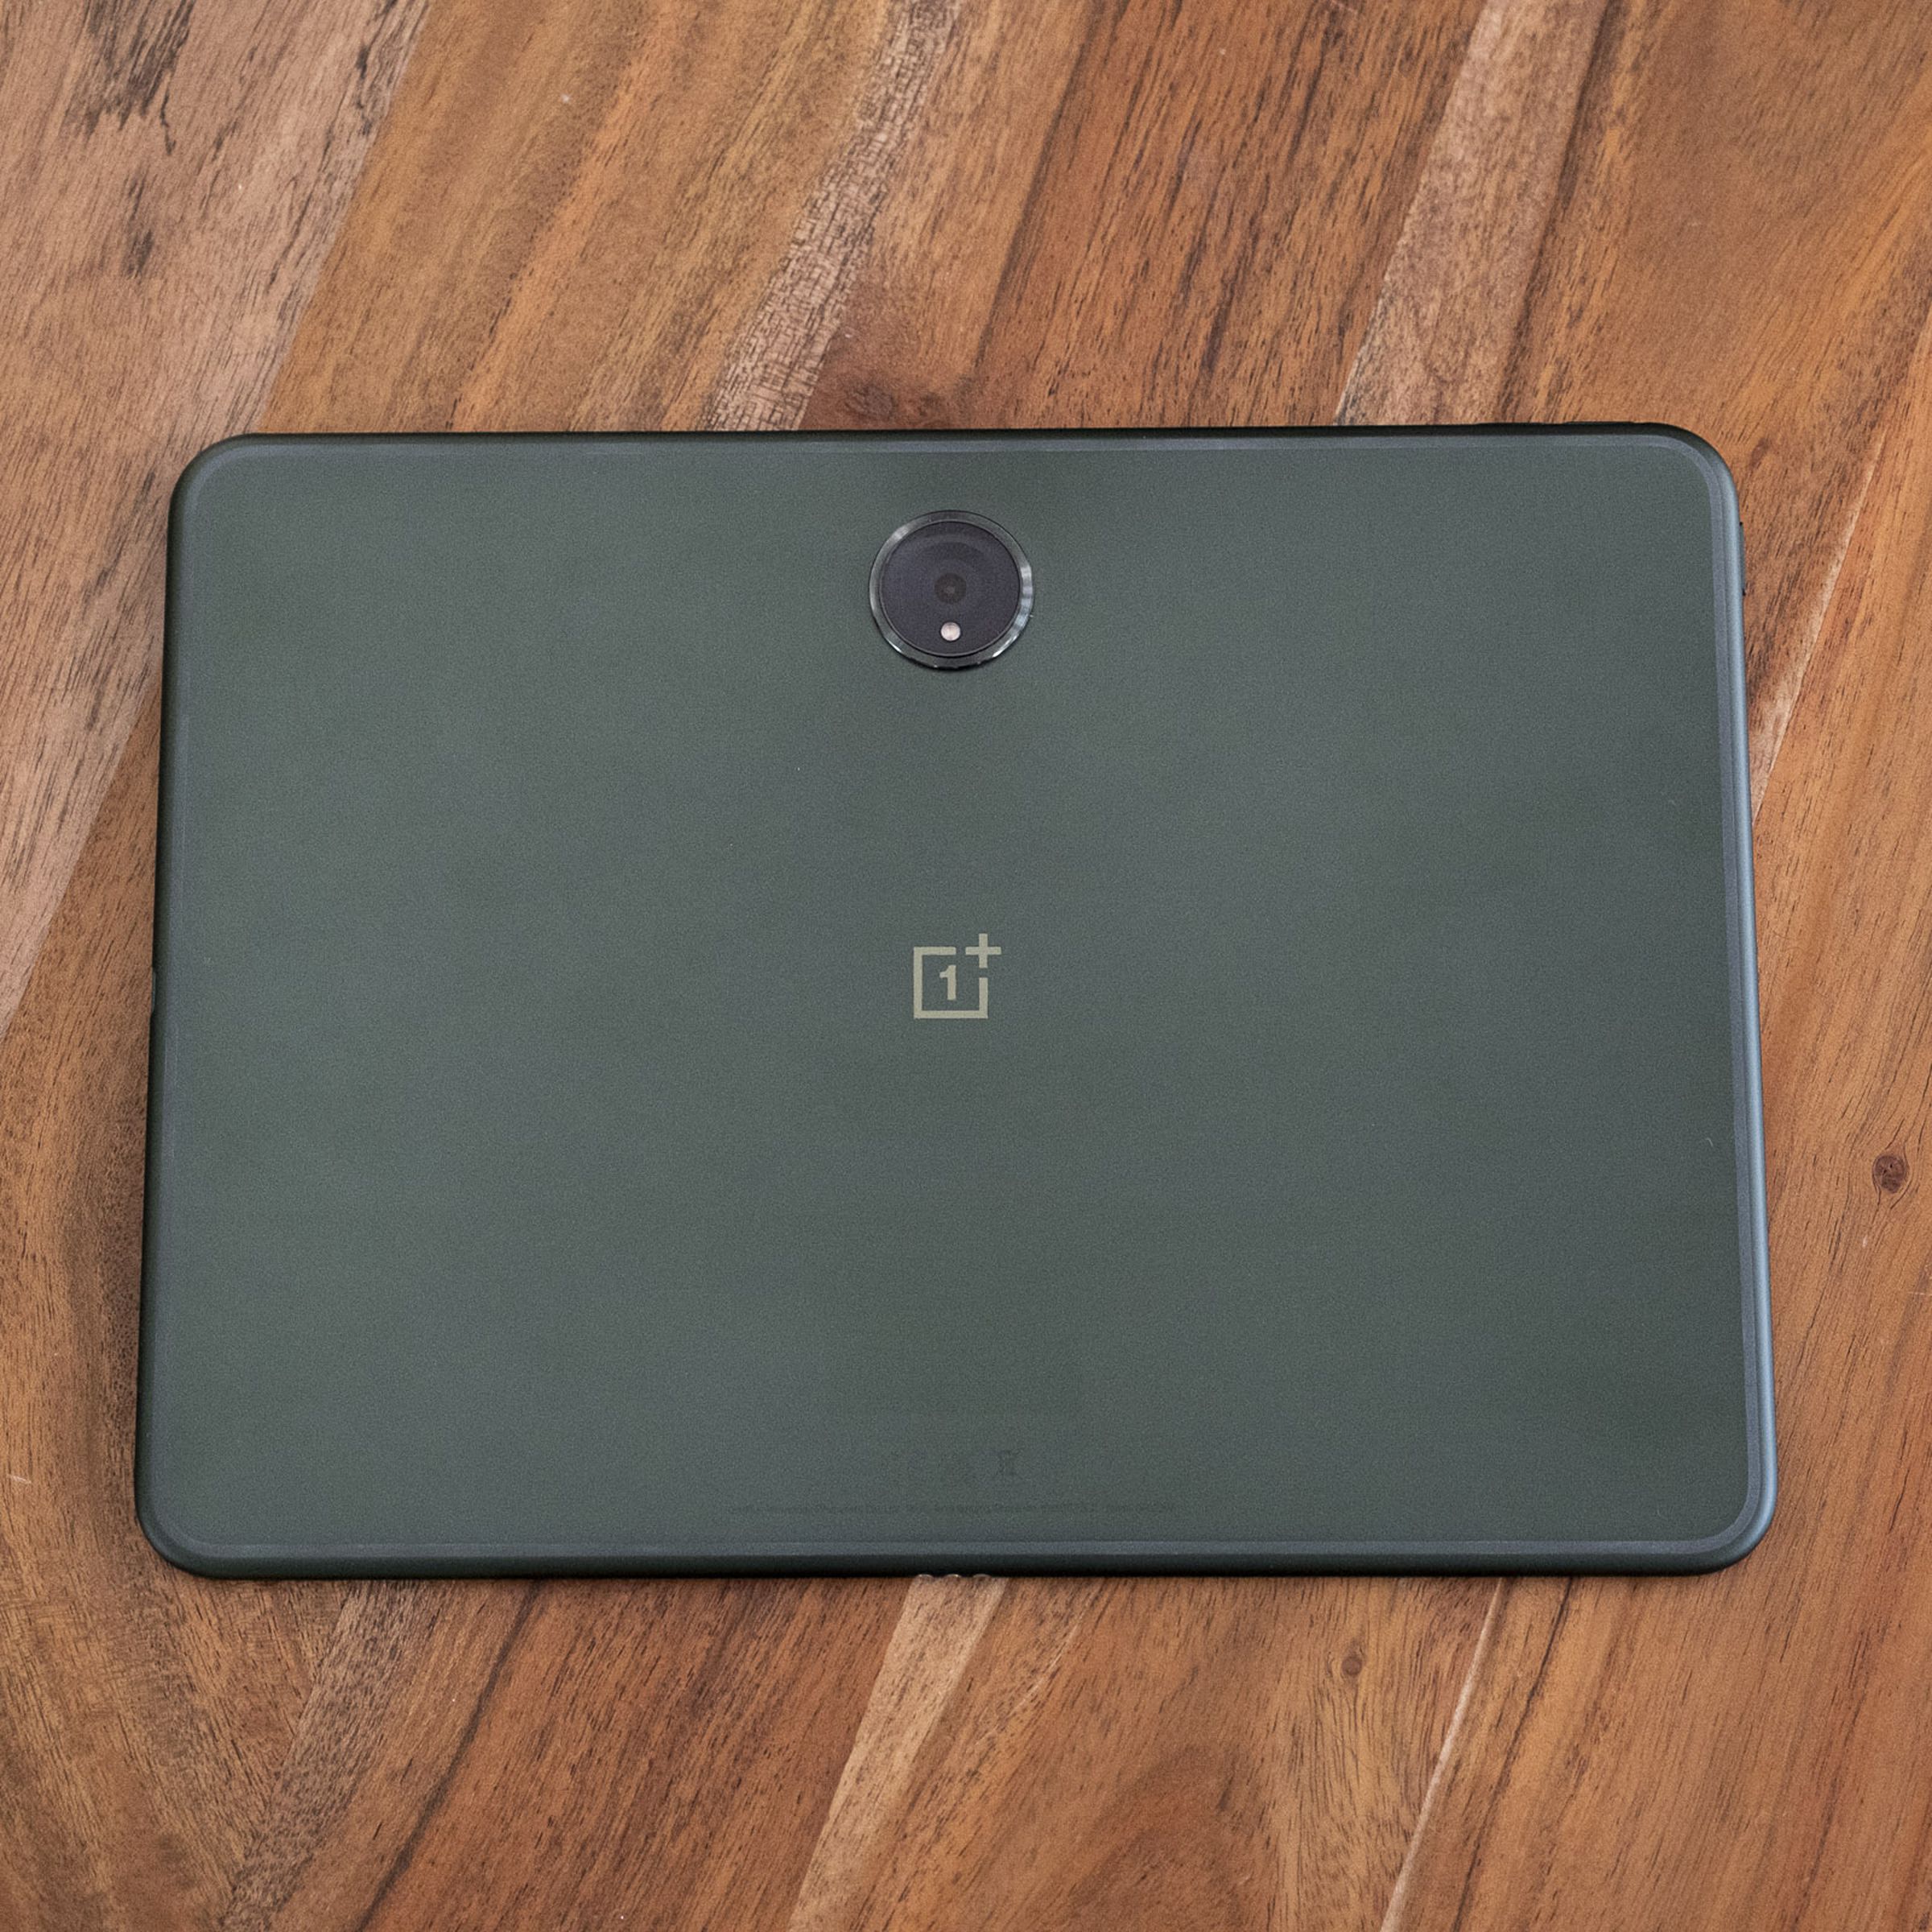 A view of the back of the OnePlus Pad